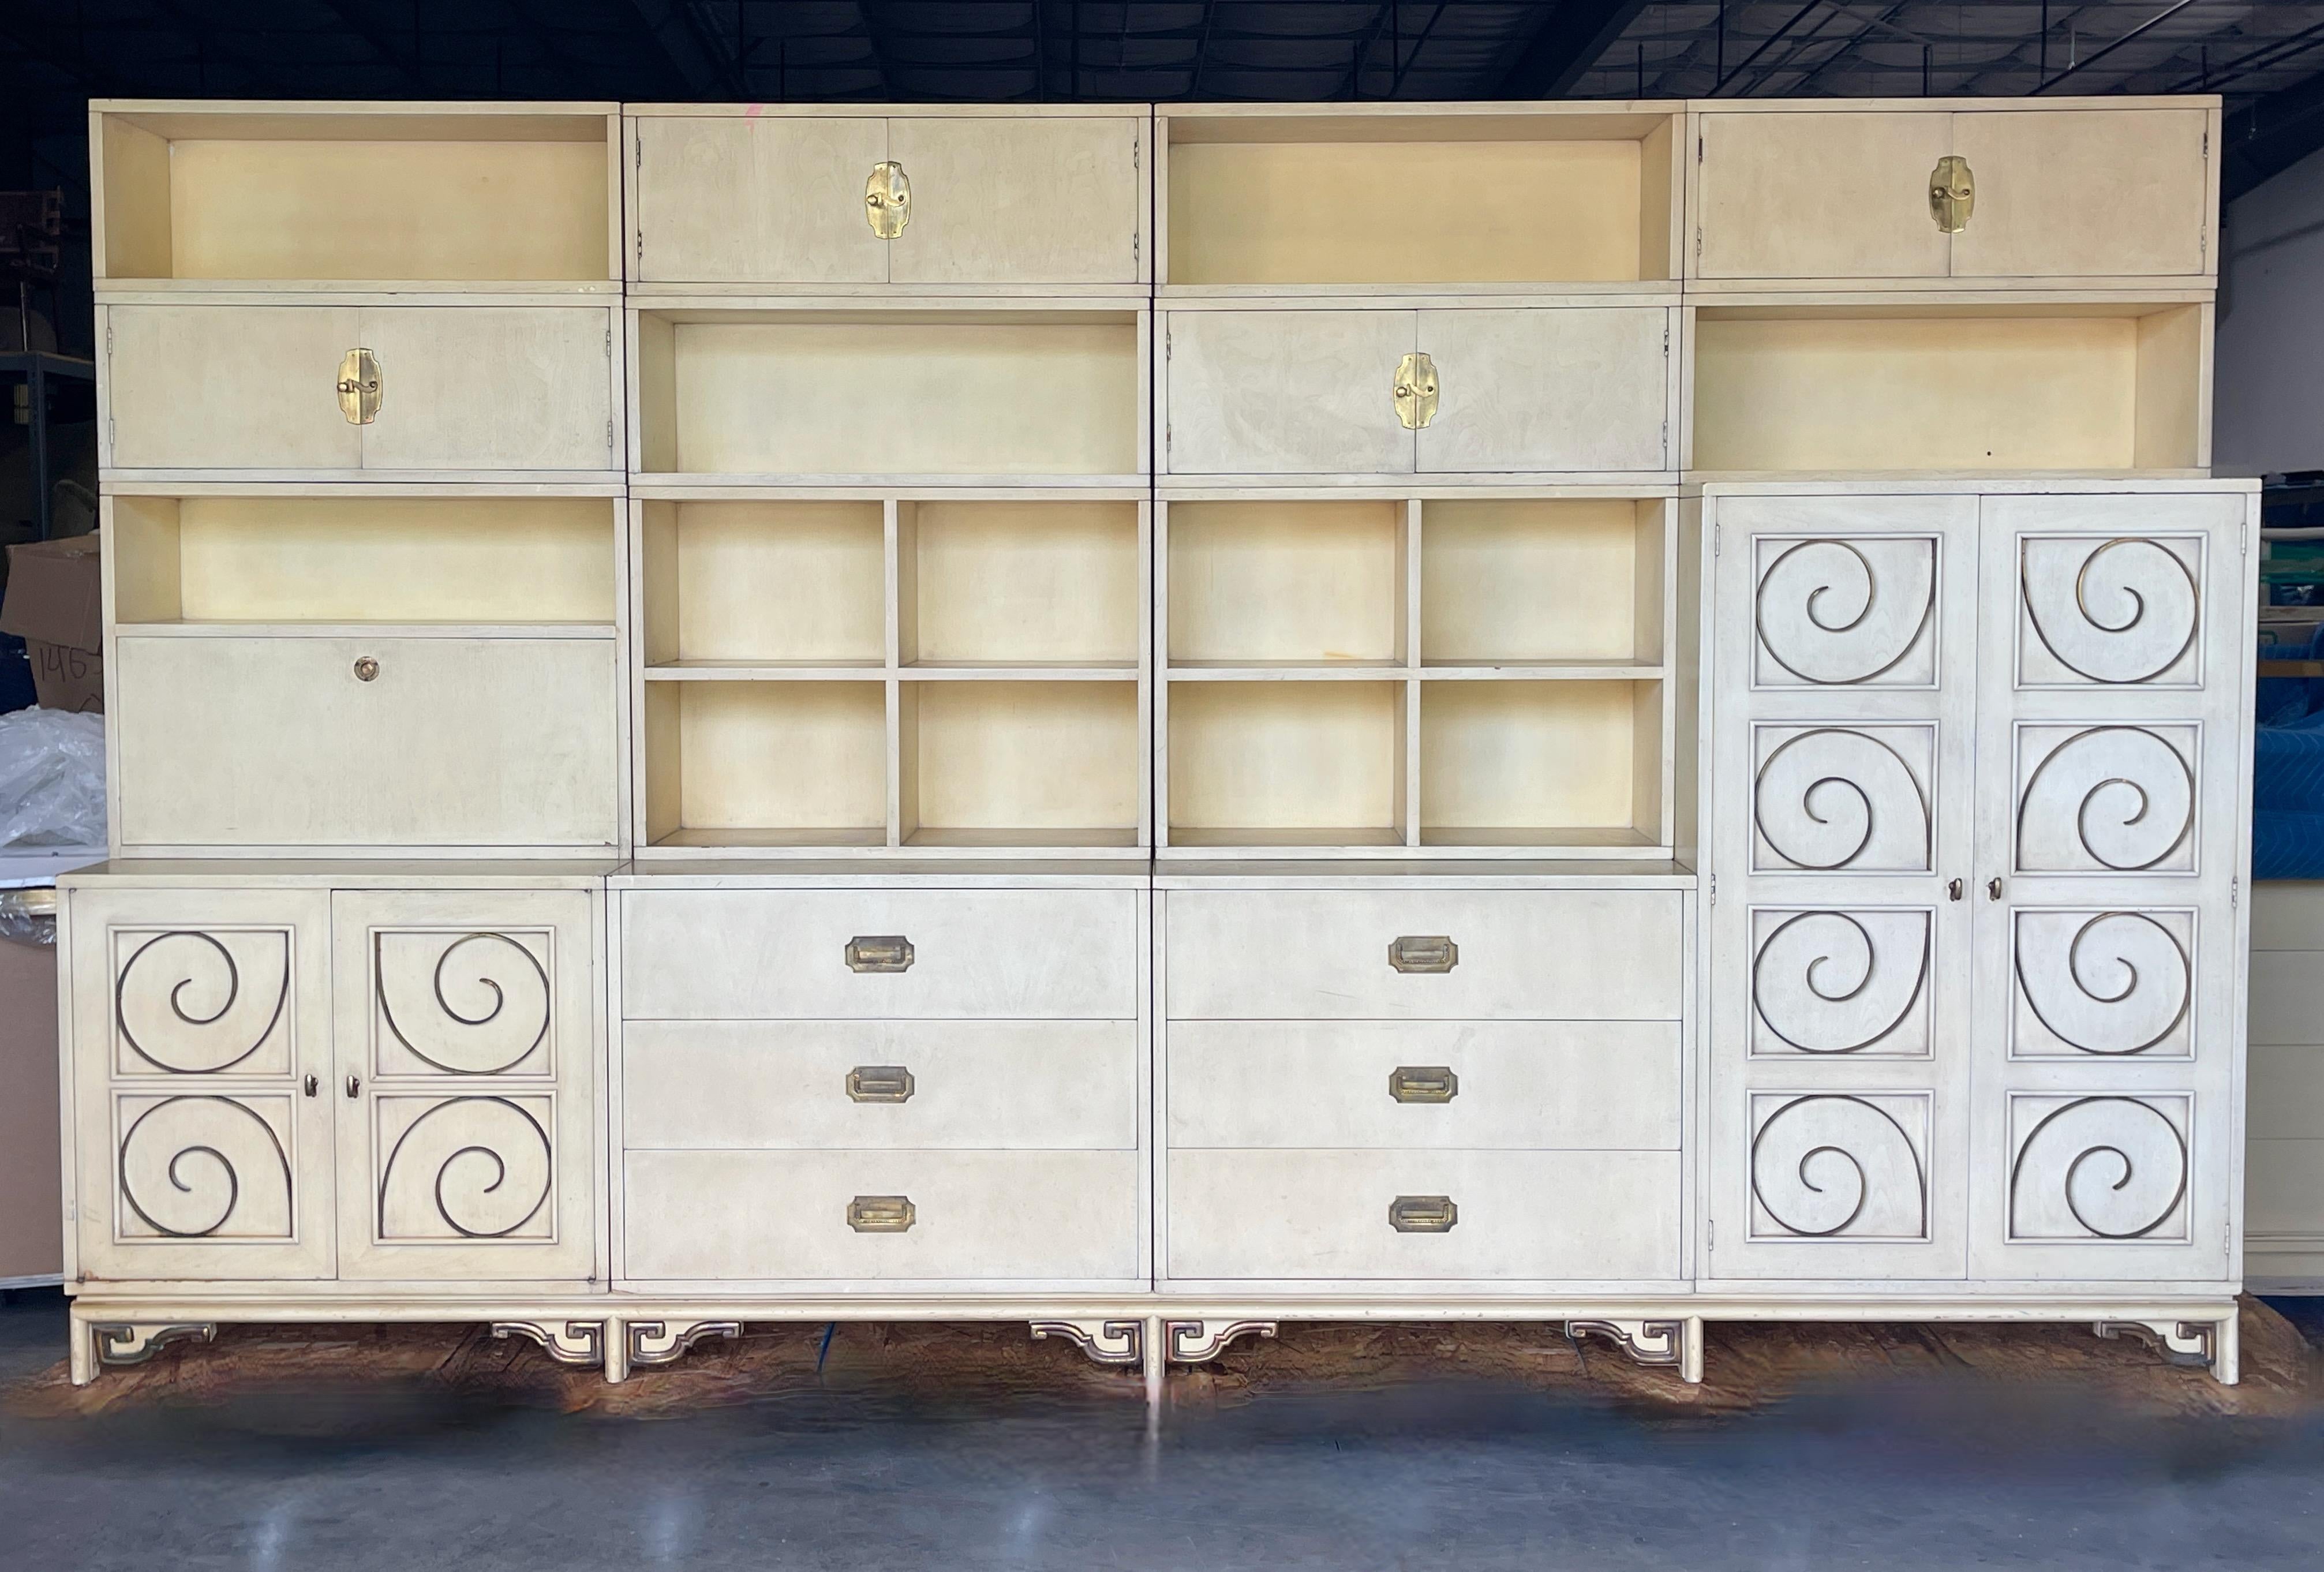 Very rare cabinet storage unit for living or bedroom by William Doezema for Mastercraft Originals from one of their earliest collections in the late 1950's. 
16 separate pieces: four chests set in one long stand topped with 11 individual